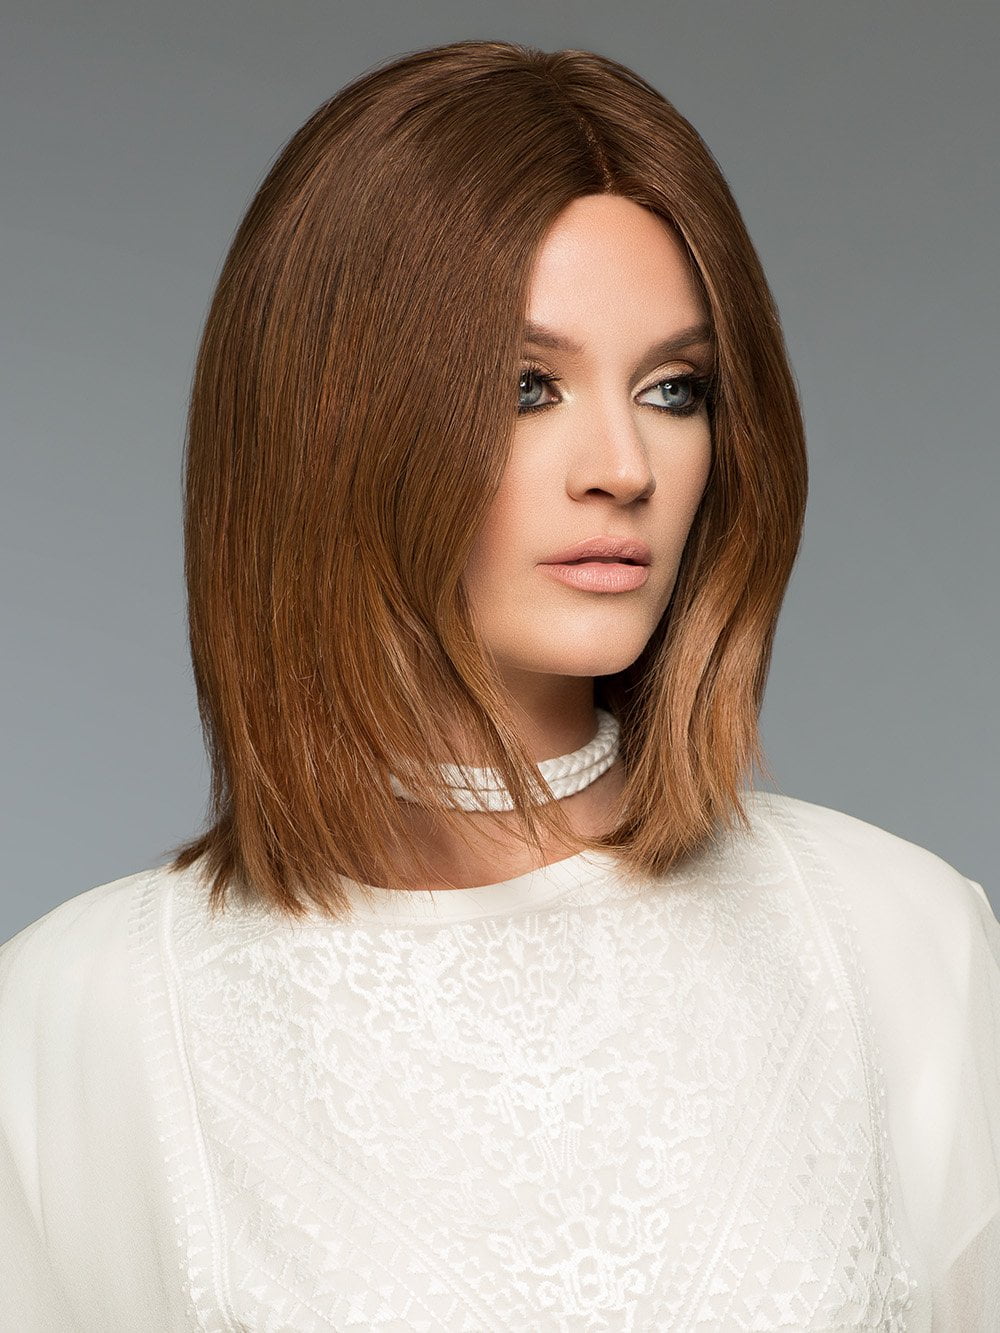 Barbara by Wig Pro is a sleek and stylish bob that goes just past the shoulders